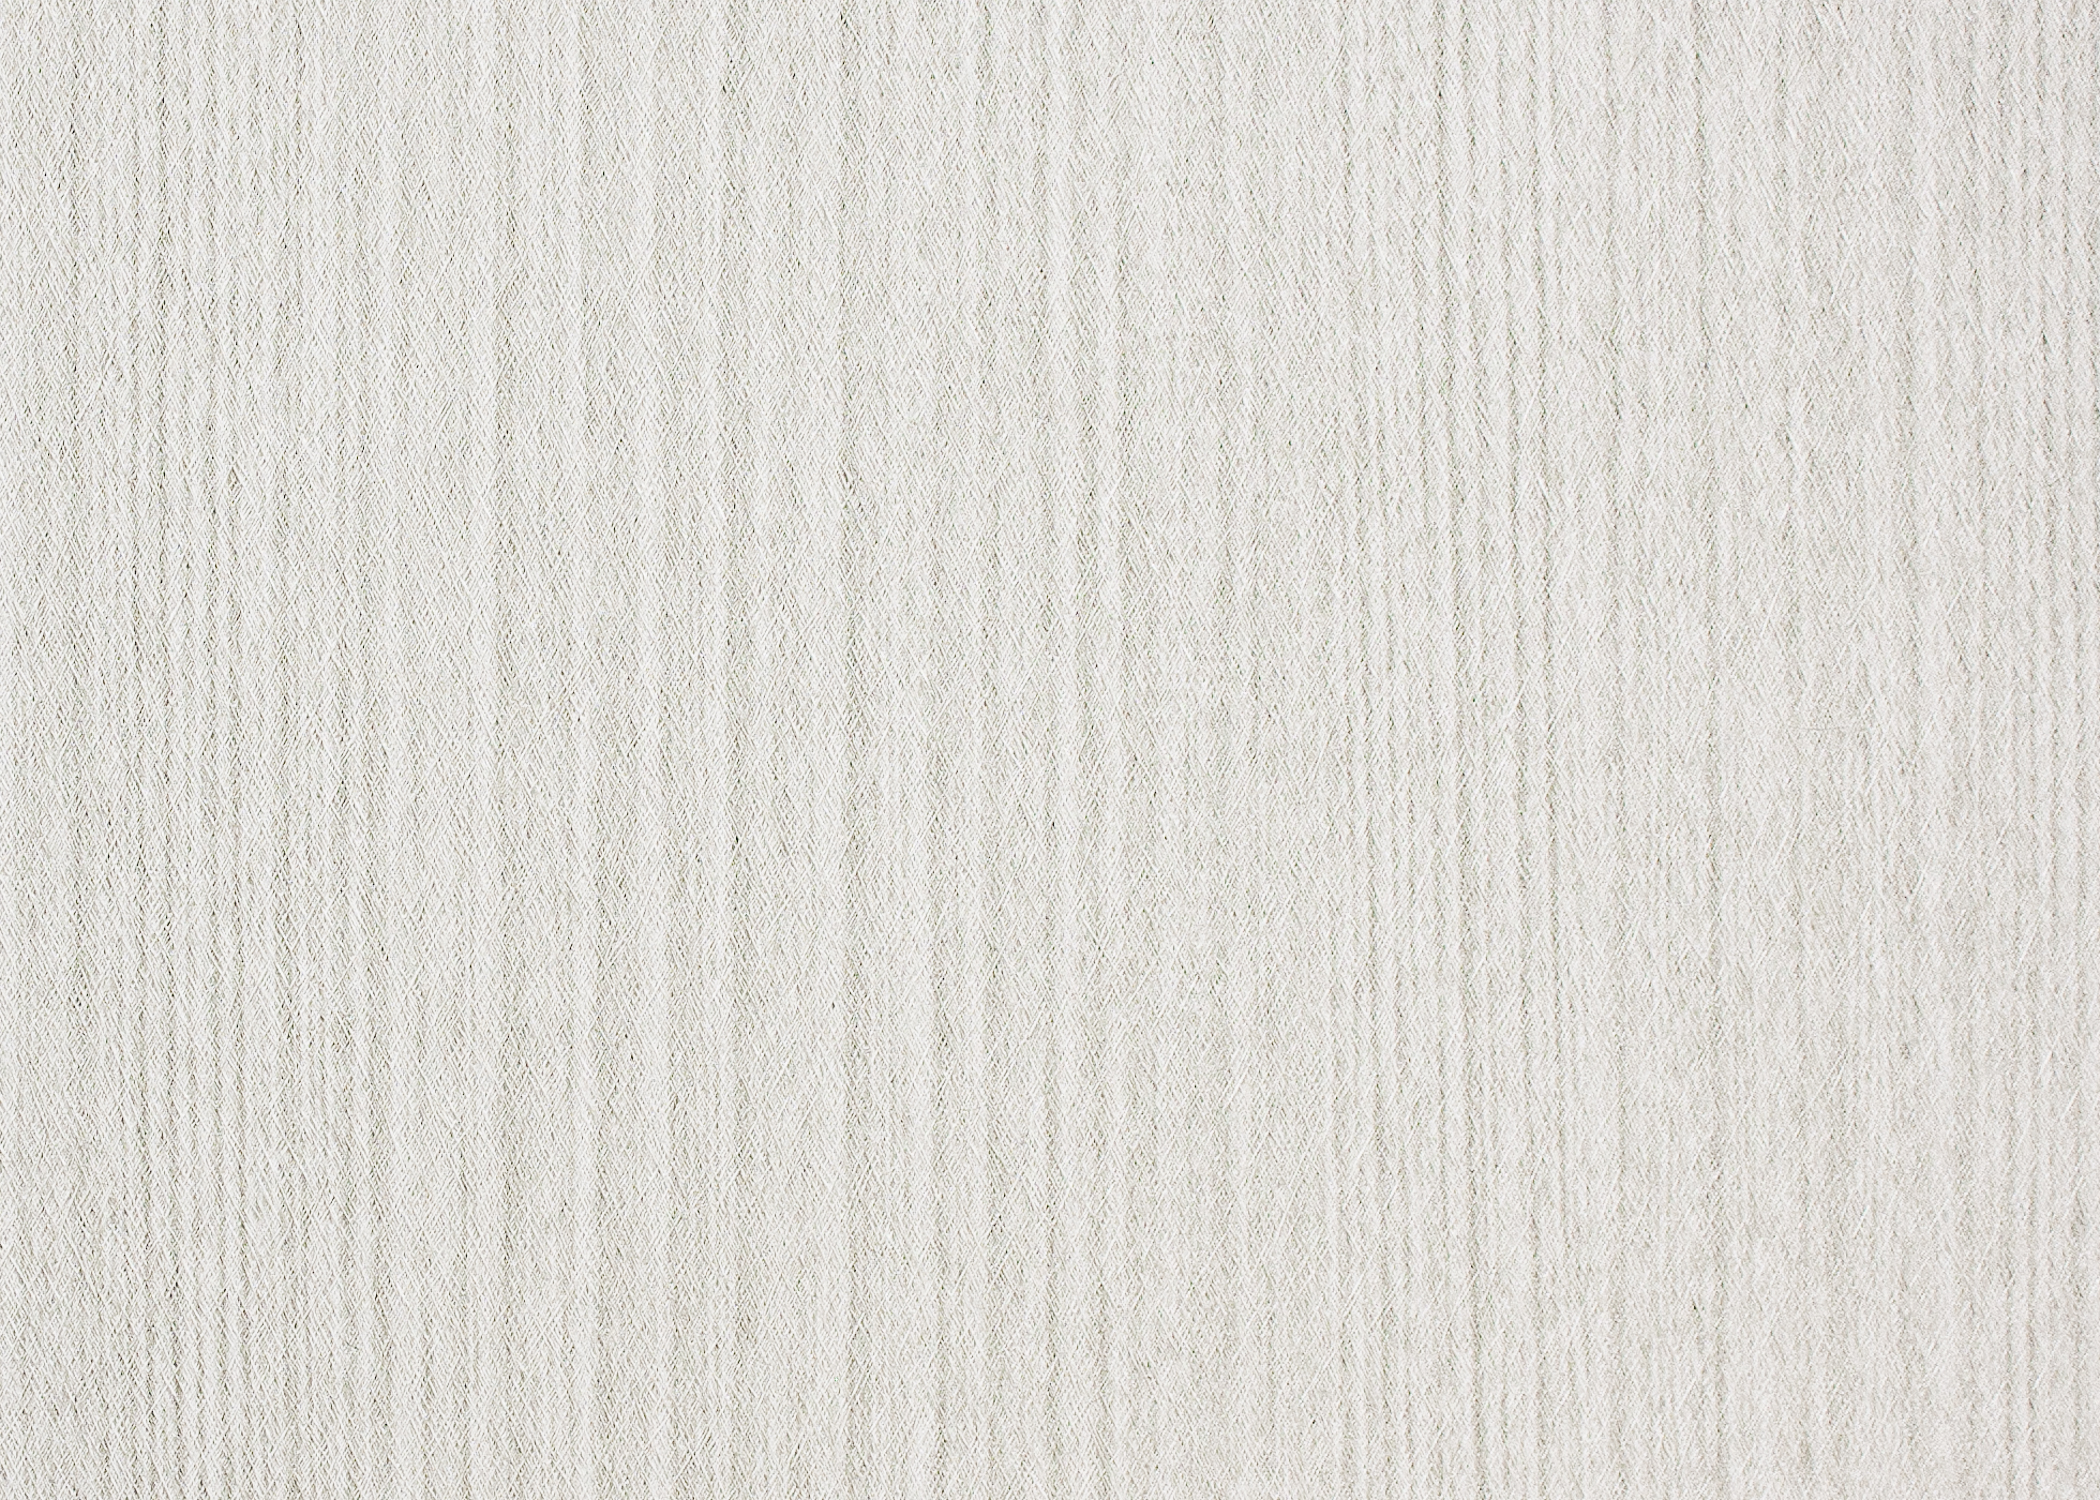 Roysons Wallcovering Lacewood Glen 8429